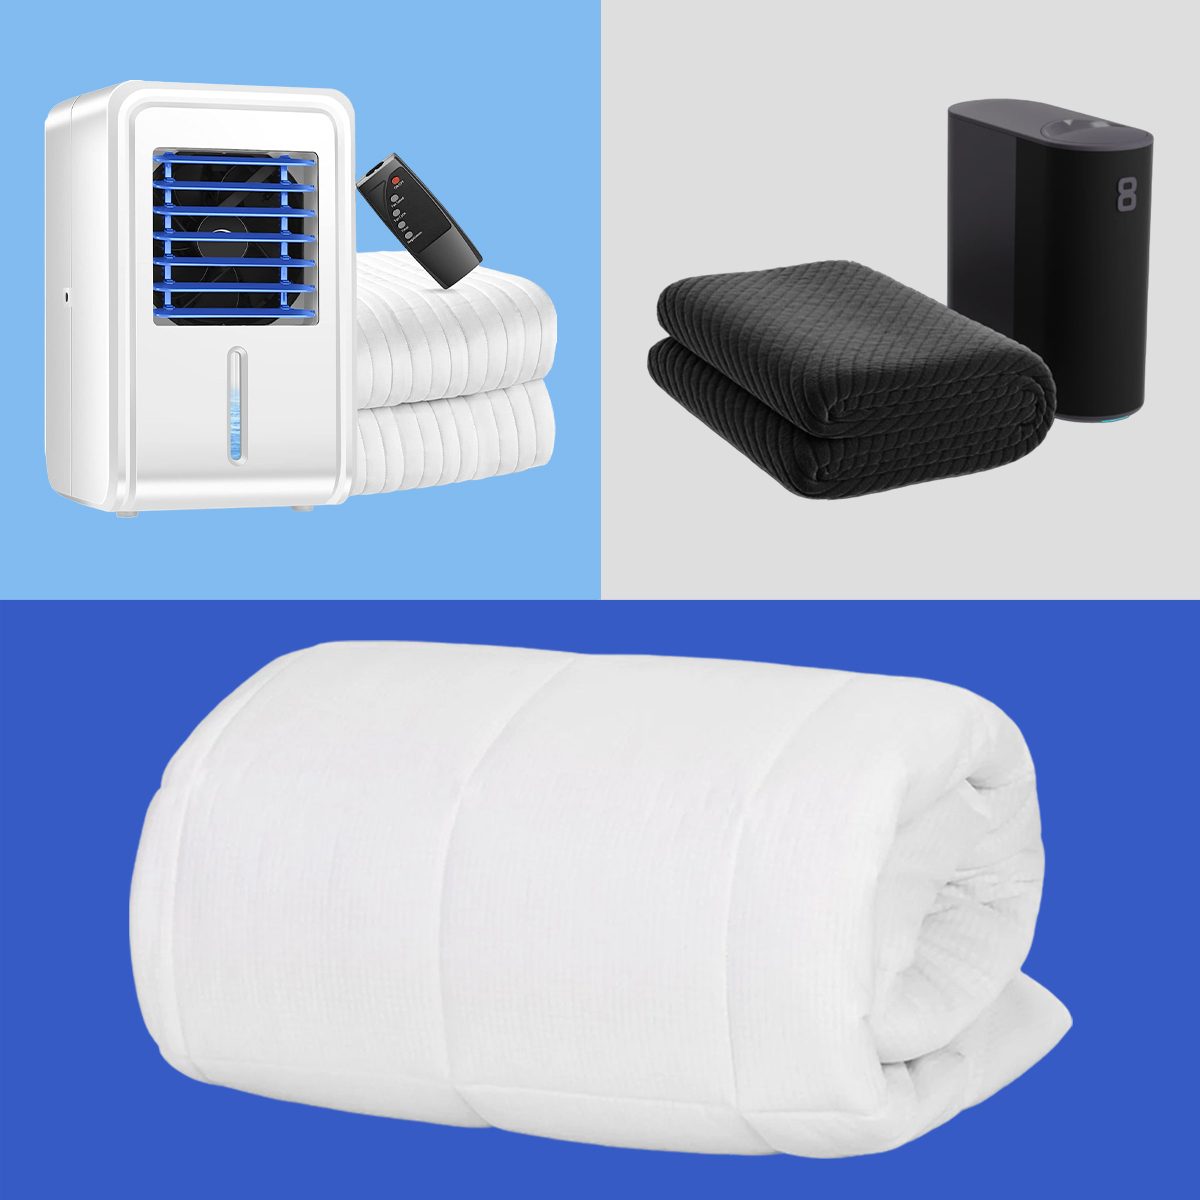 https://www.rd.com/wp-content/uploads/2023/02/6-Expert-Recommended-Bed-Cooling-Systems-for-Hot-Sleepers_ecomm_via-amazon.com_.jpg